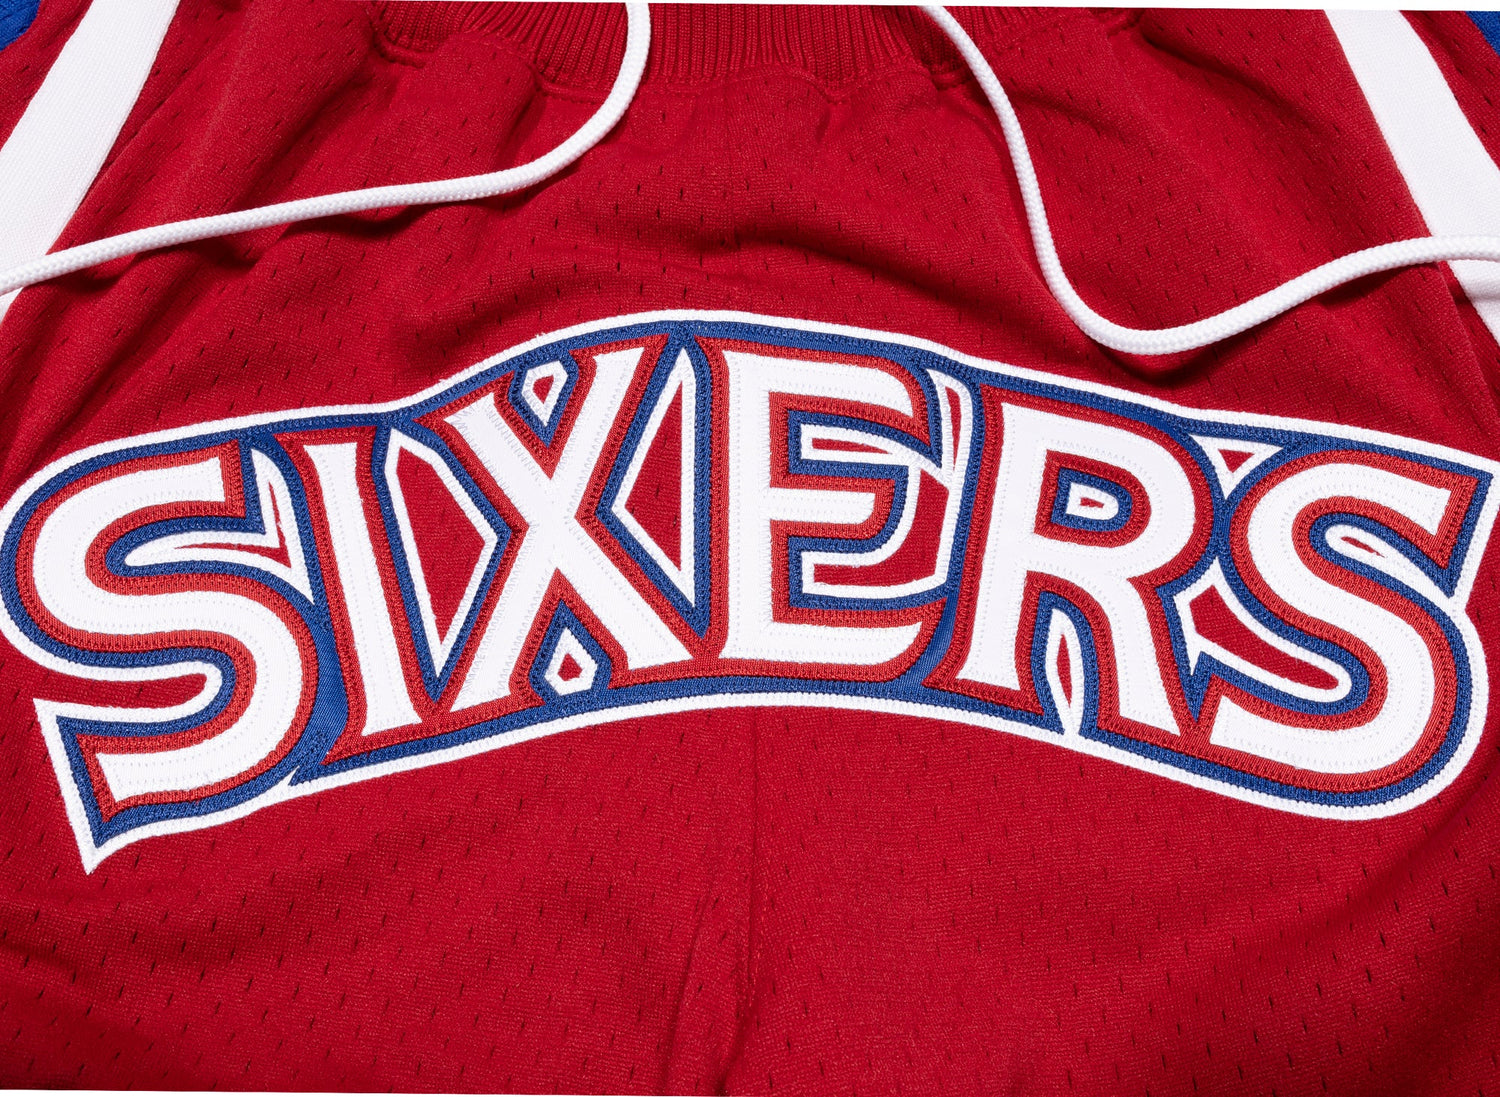 just don shorts sixers